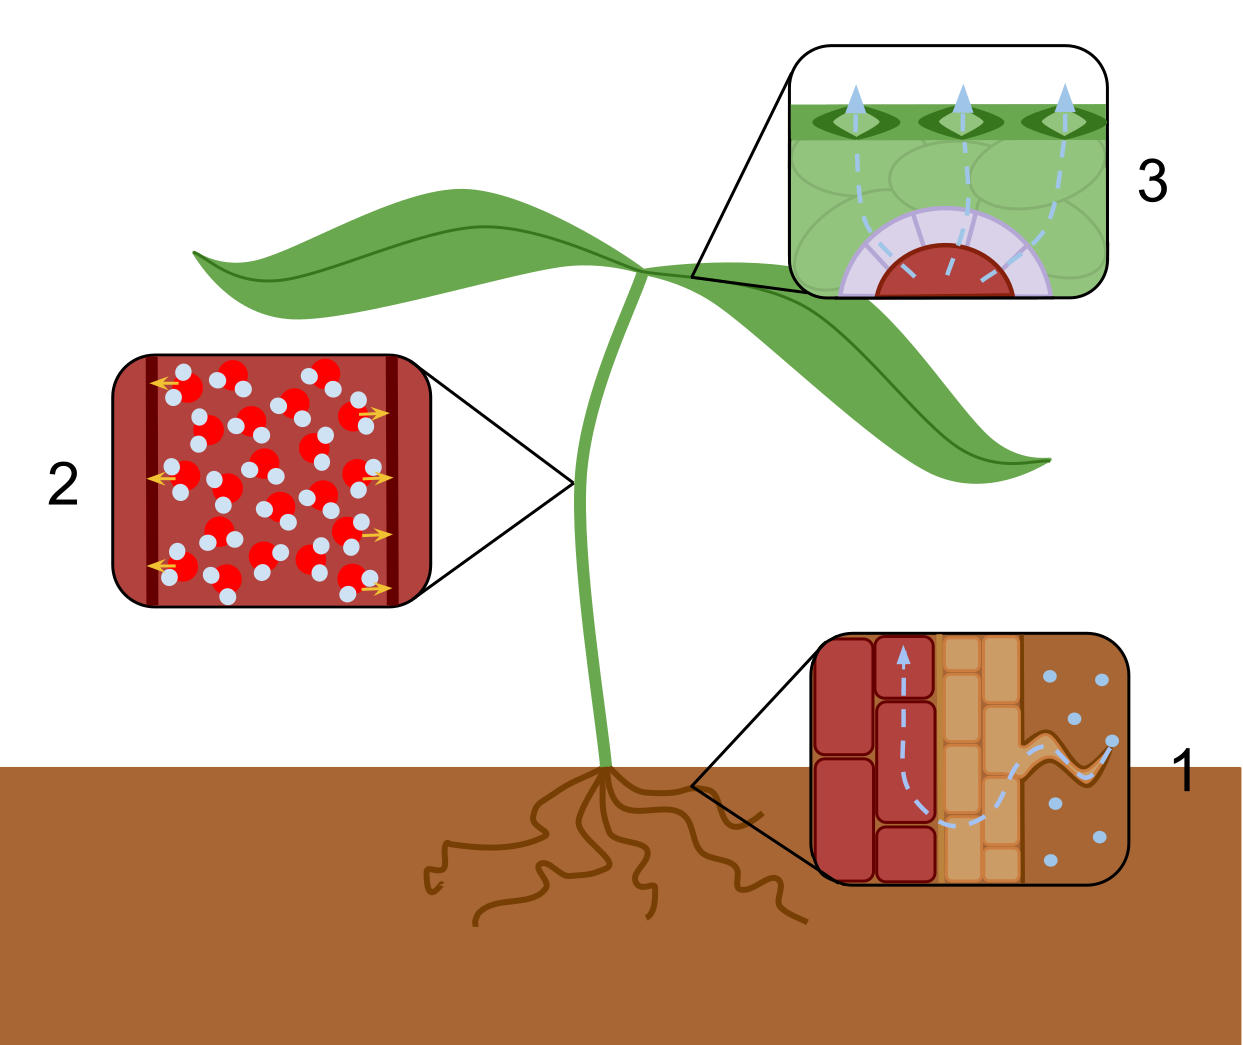 In transpiration, water enters the plant through the roots (1), moves up the xylem (2), and then exits through stomatal pores (3).